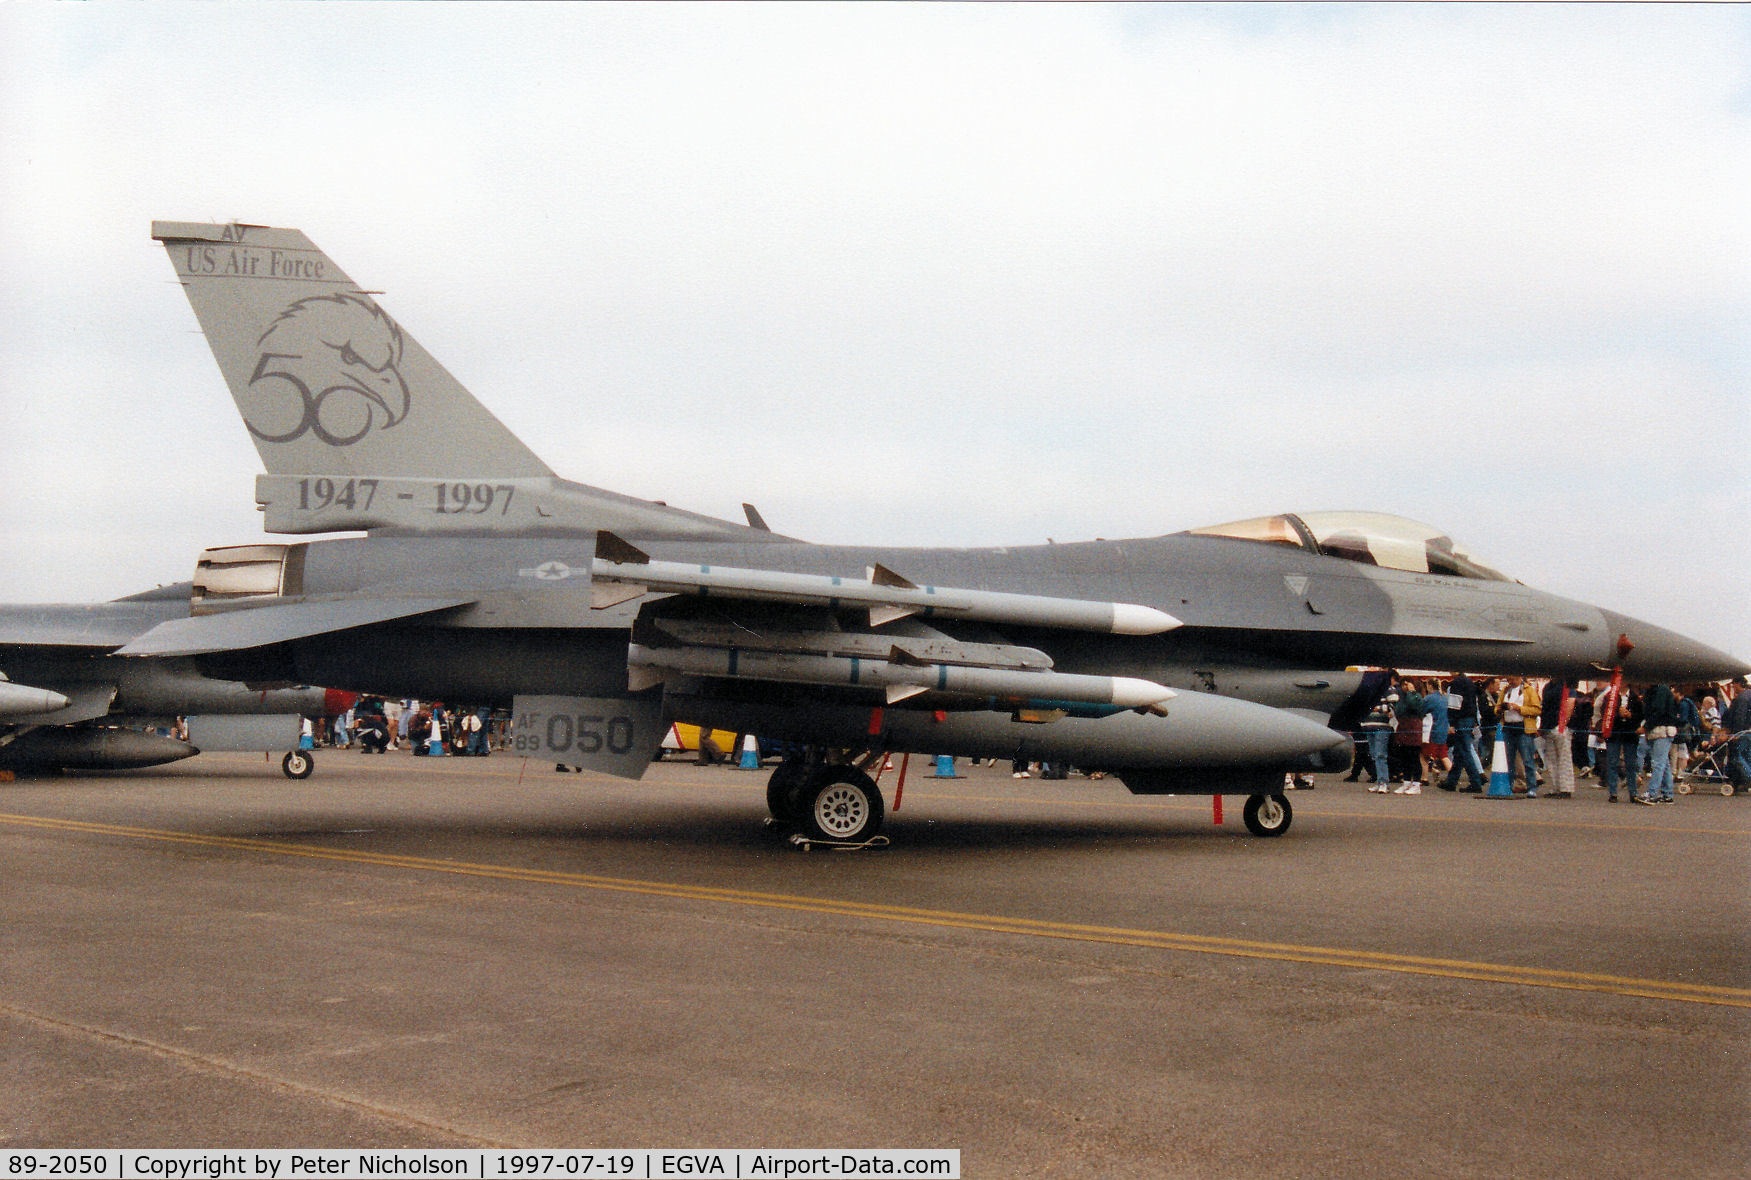 89-2050, 1989 General Dynamics F-16C Fighting Falcon C/N 1C-203, F-16C Falcon, callsign Spike 02, of 510th Fighter Squadron/31st Fighter Wing at Aviano in 50th anniversary markings on display at the 1997 Intnl Air Tattoo at RAF Fairford.